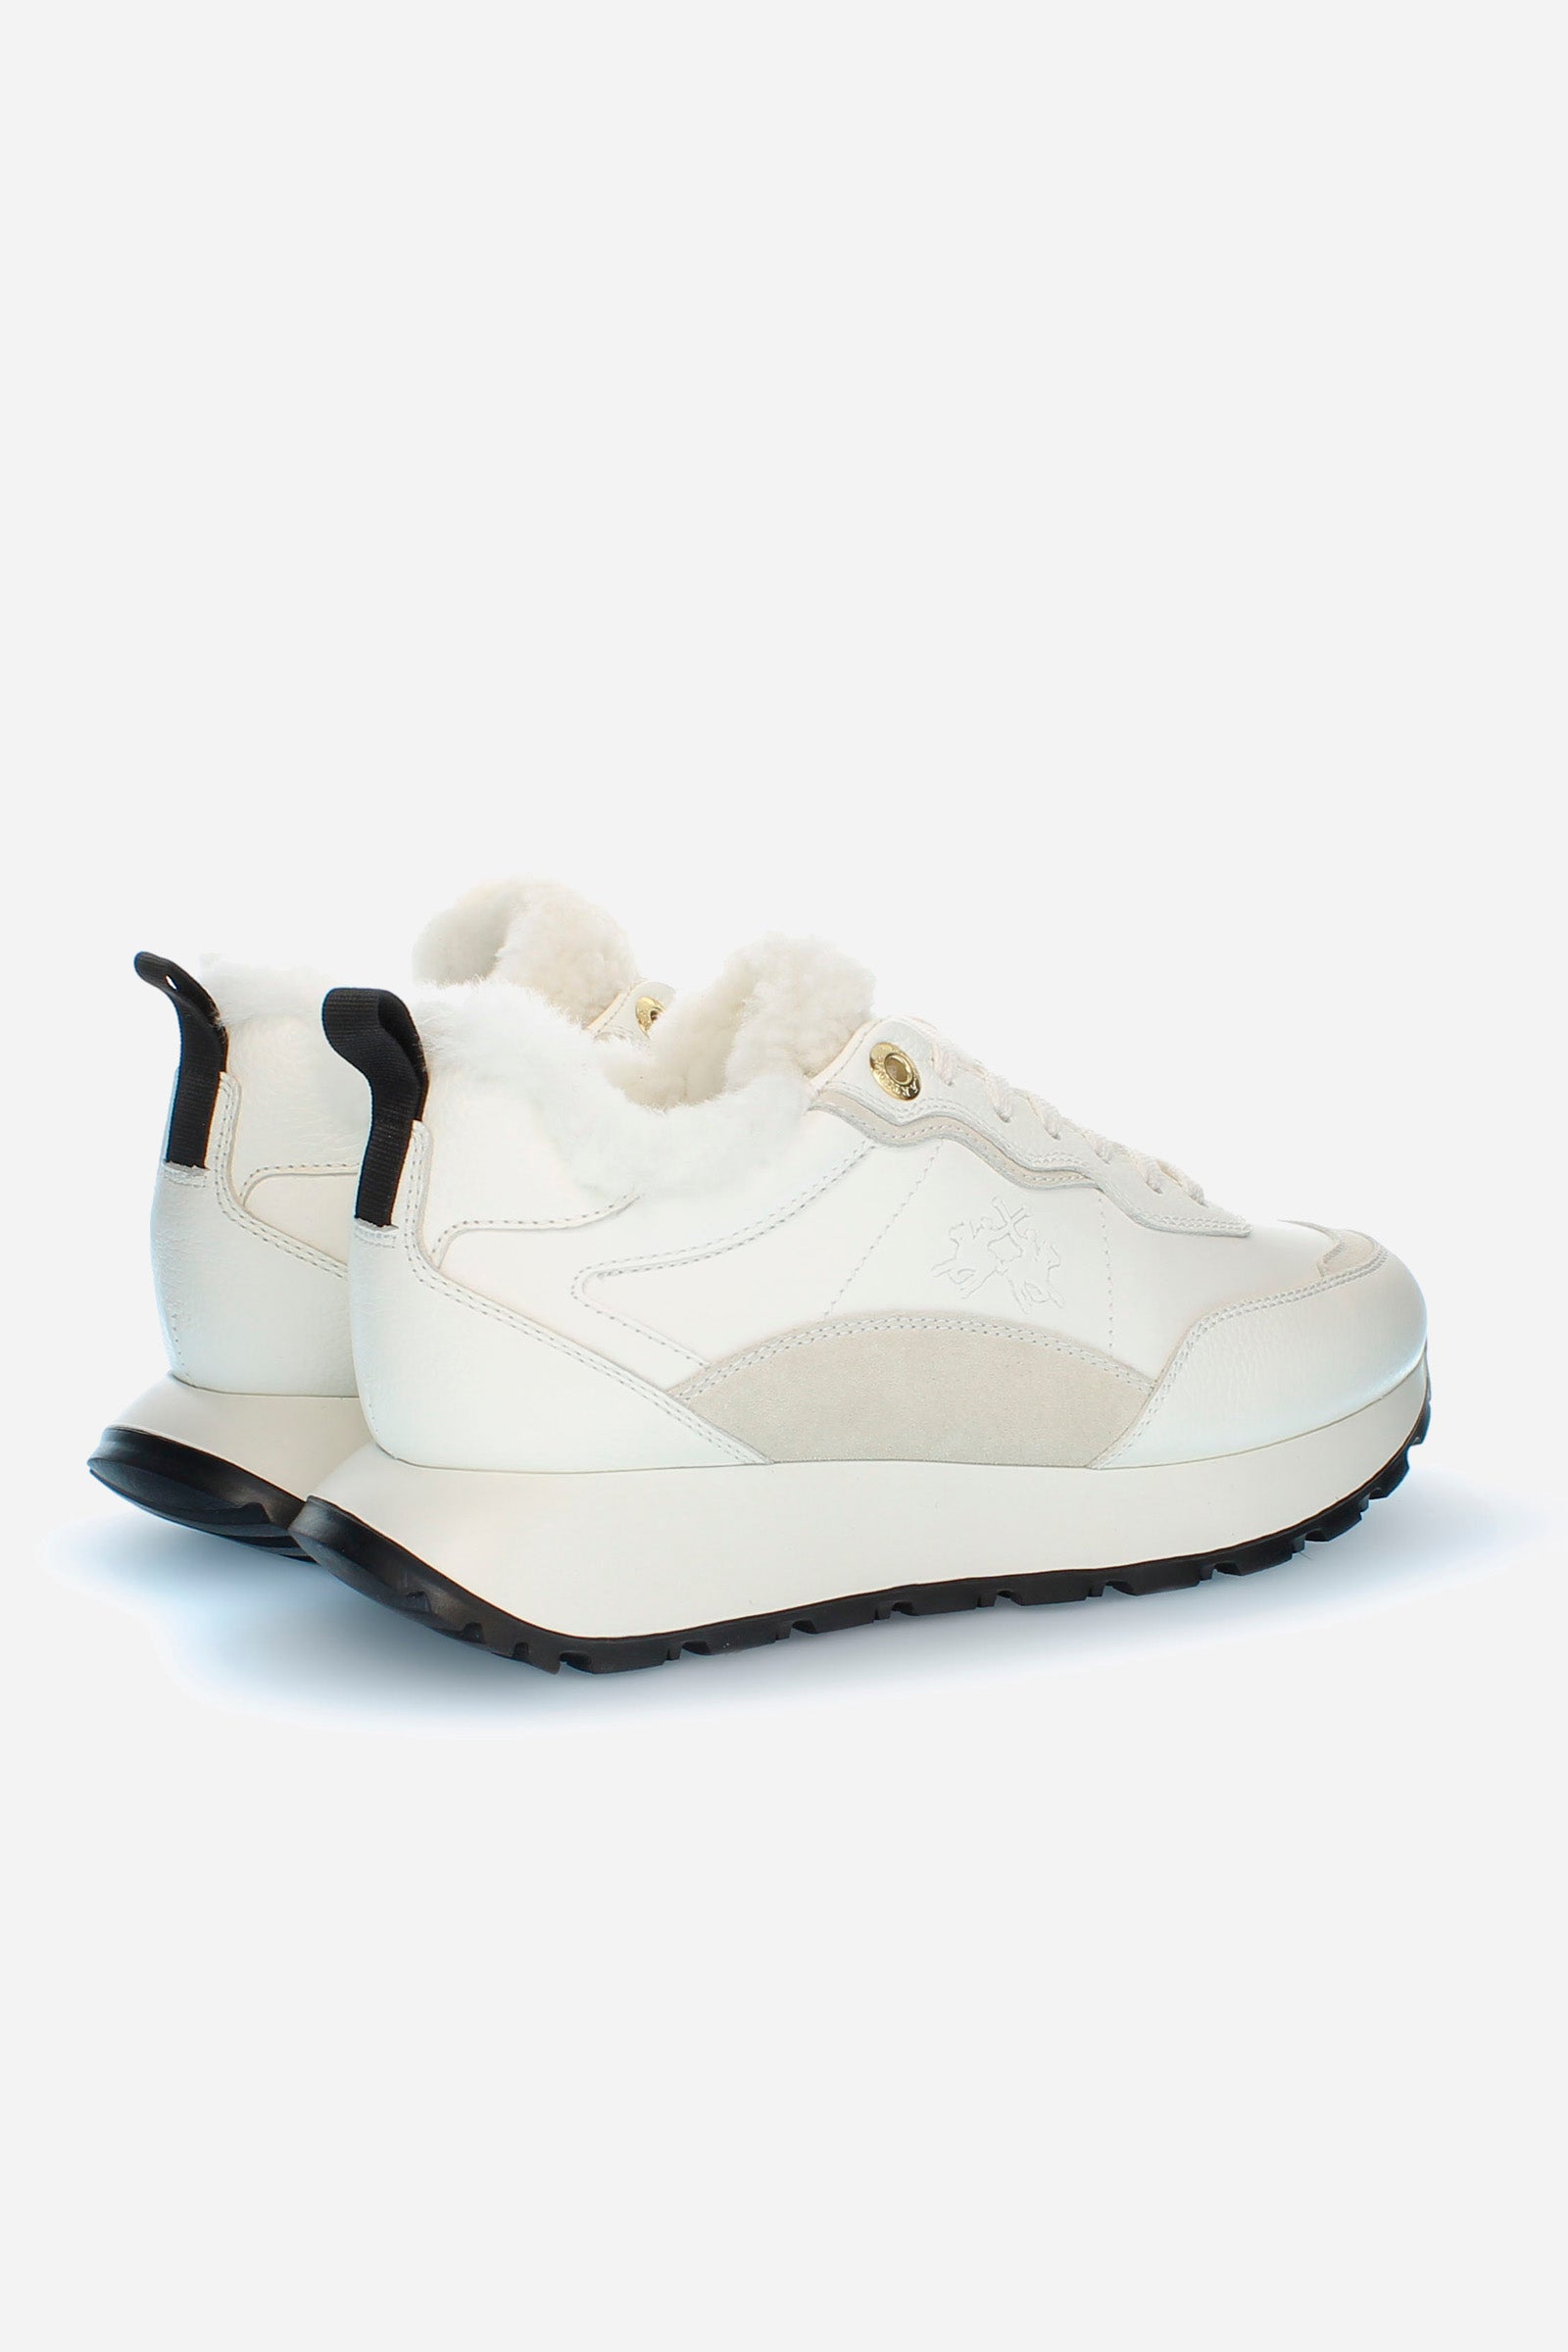 Women's trainer made of soft tumbled leather